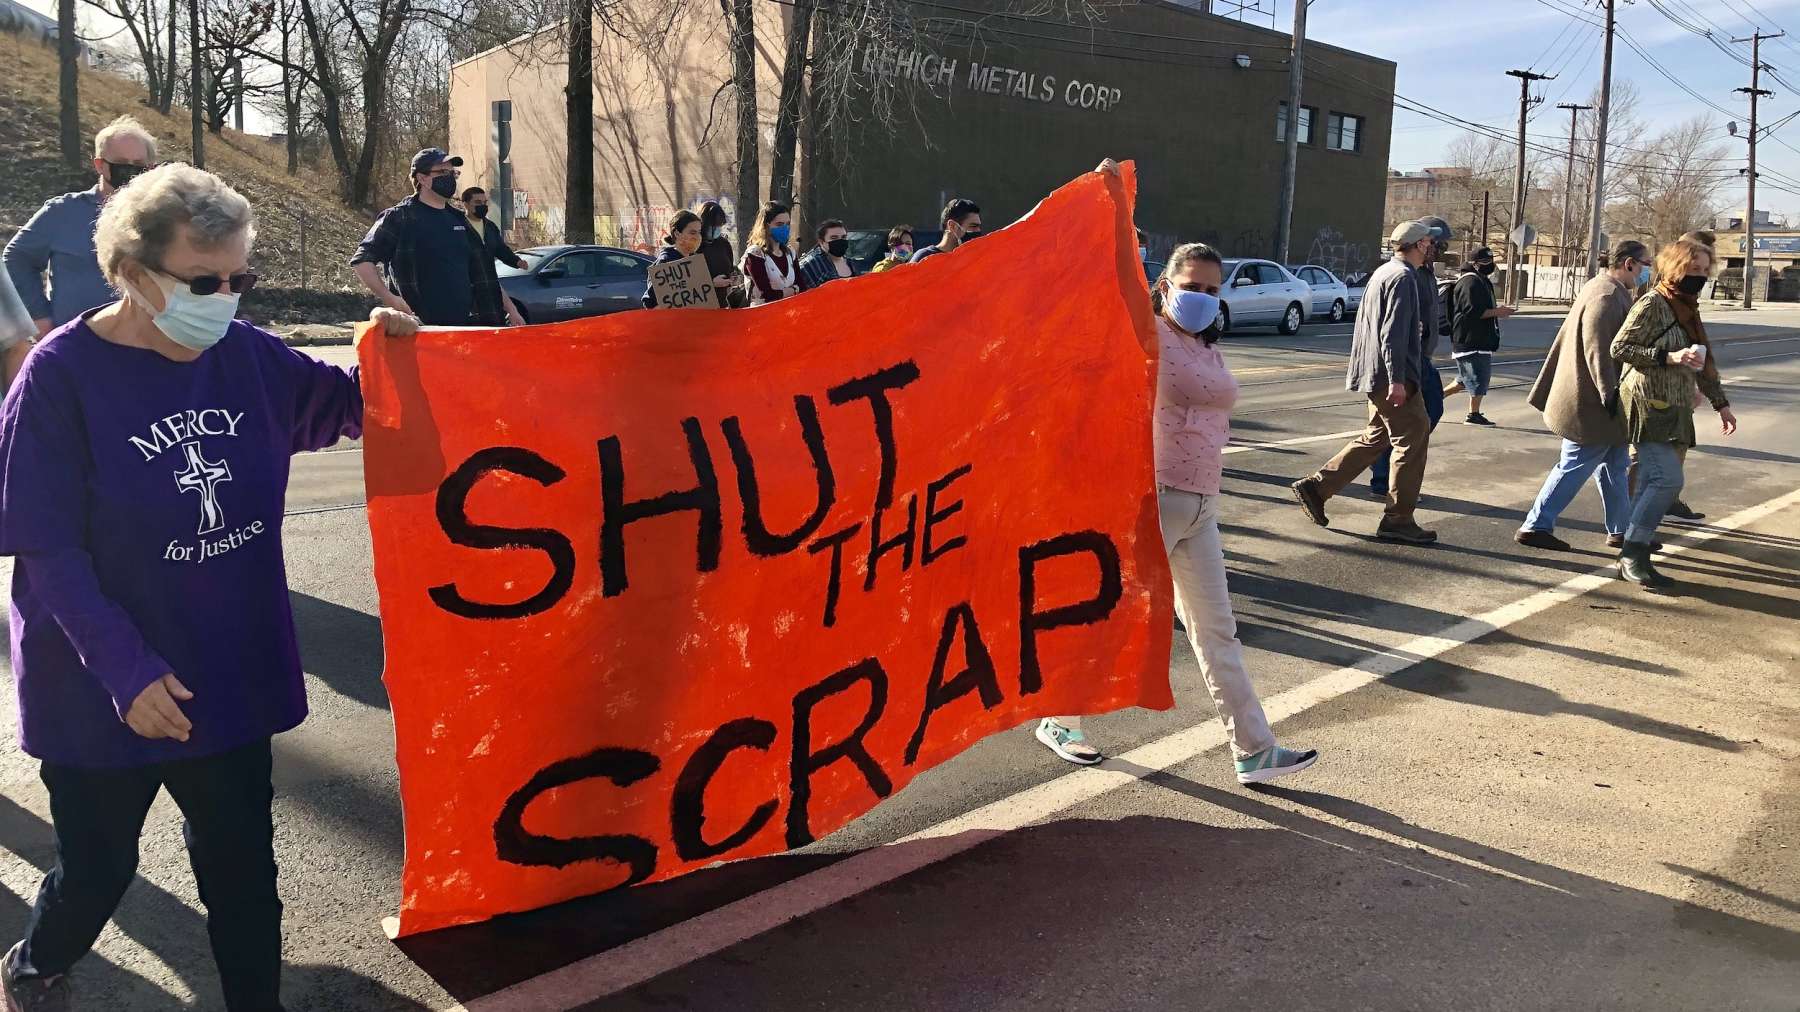 People’s Port Authority rallies to shut down scrap metal yard and all toxic industries in the Port